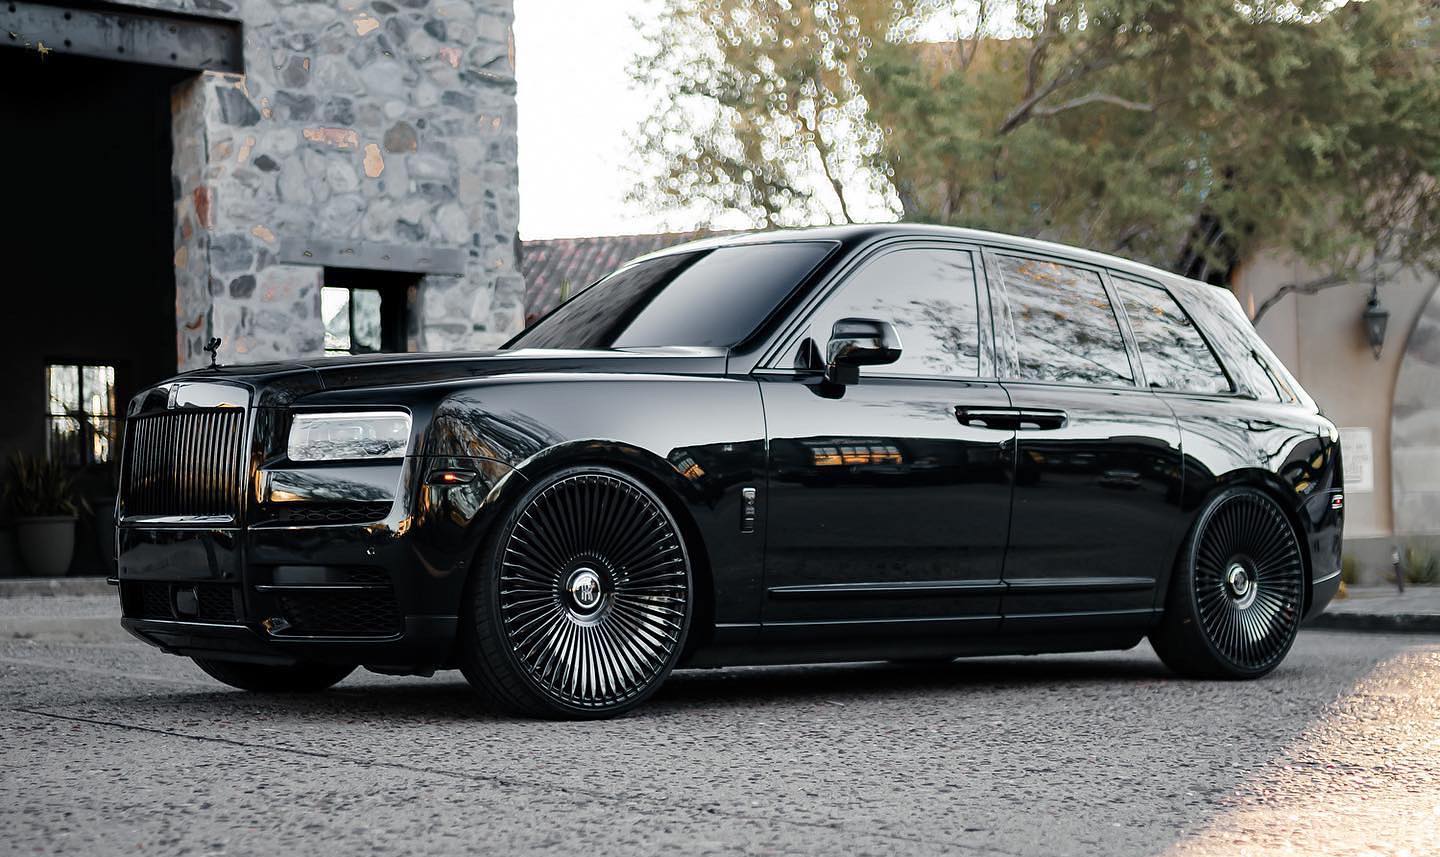 Is This Modified Rolls-Royce Cullinan Really Worth $729,995?